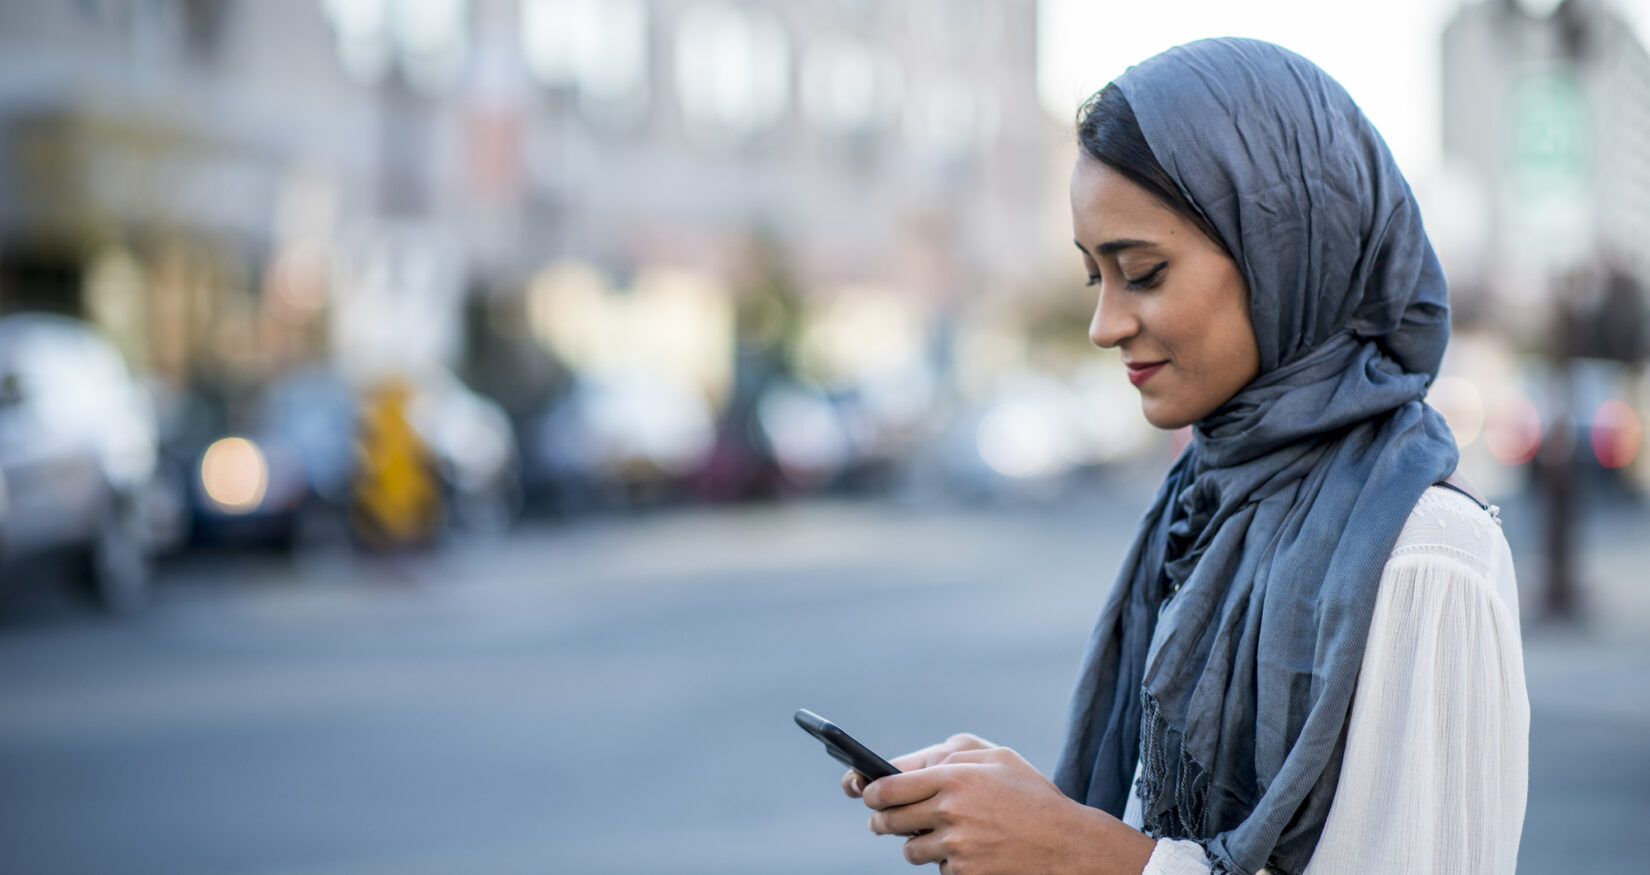 A Muslim woman is outdoors on a sunny day. She is wearing casual clothing and a head scarf. She is standing near a road and sending a message with her smartphone.